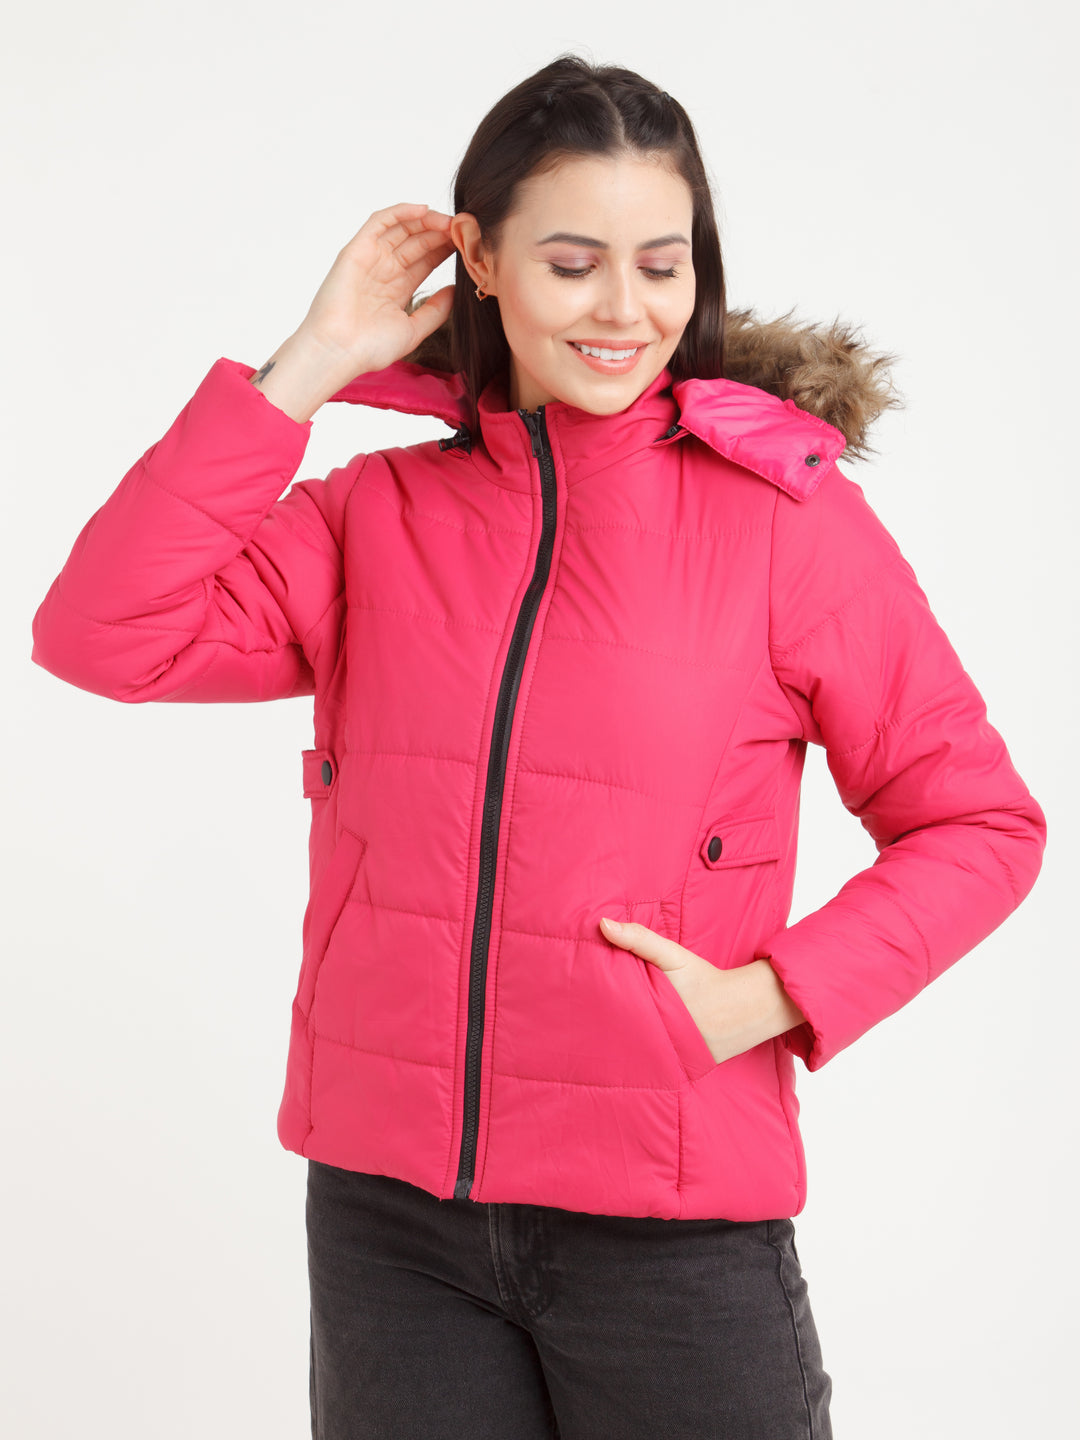 Red Solid Jacket For Women